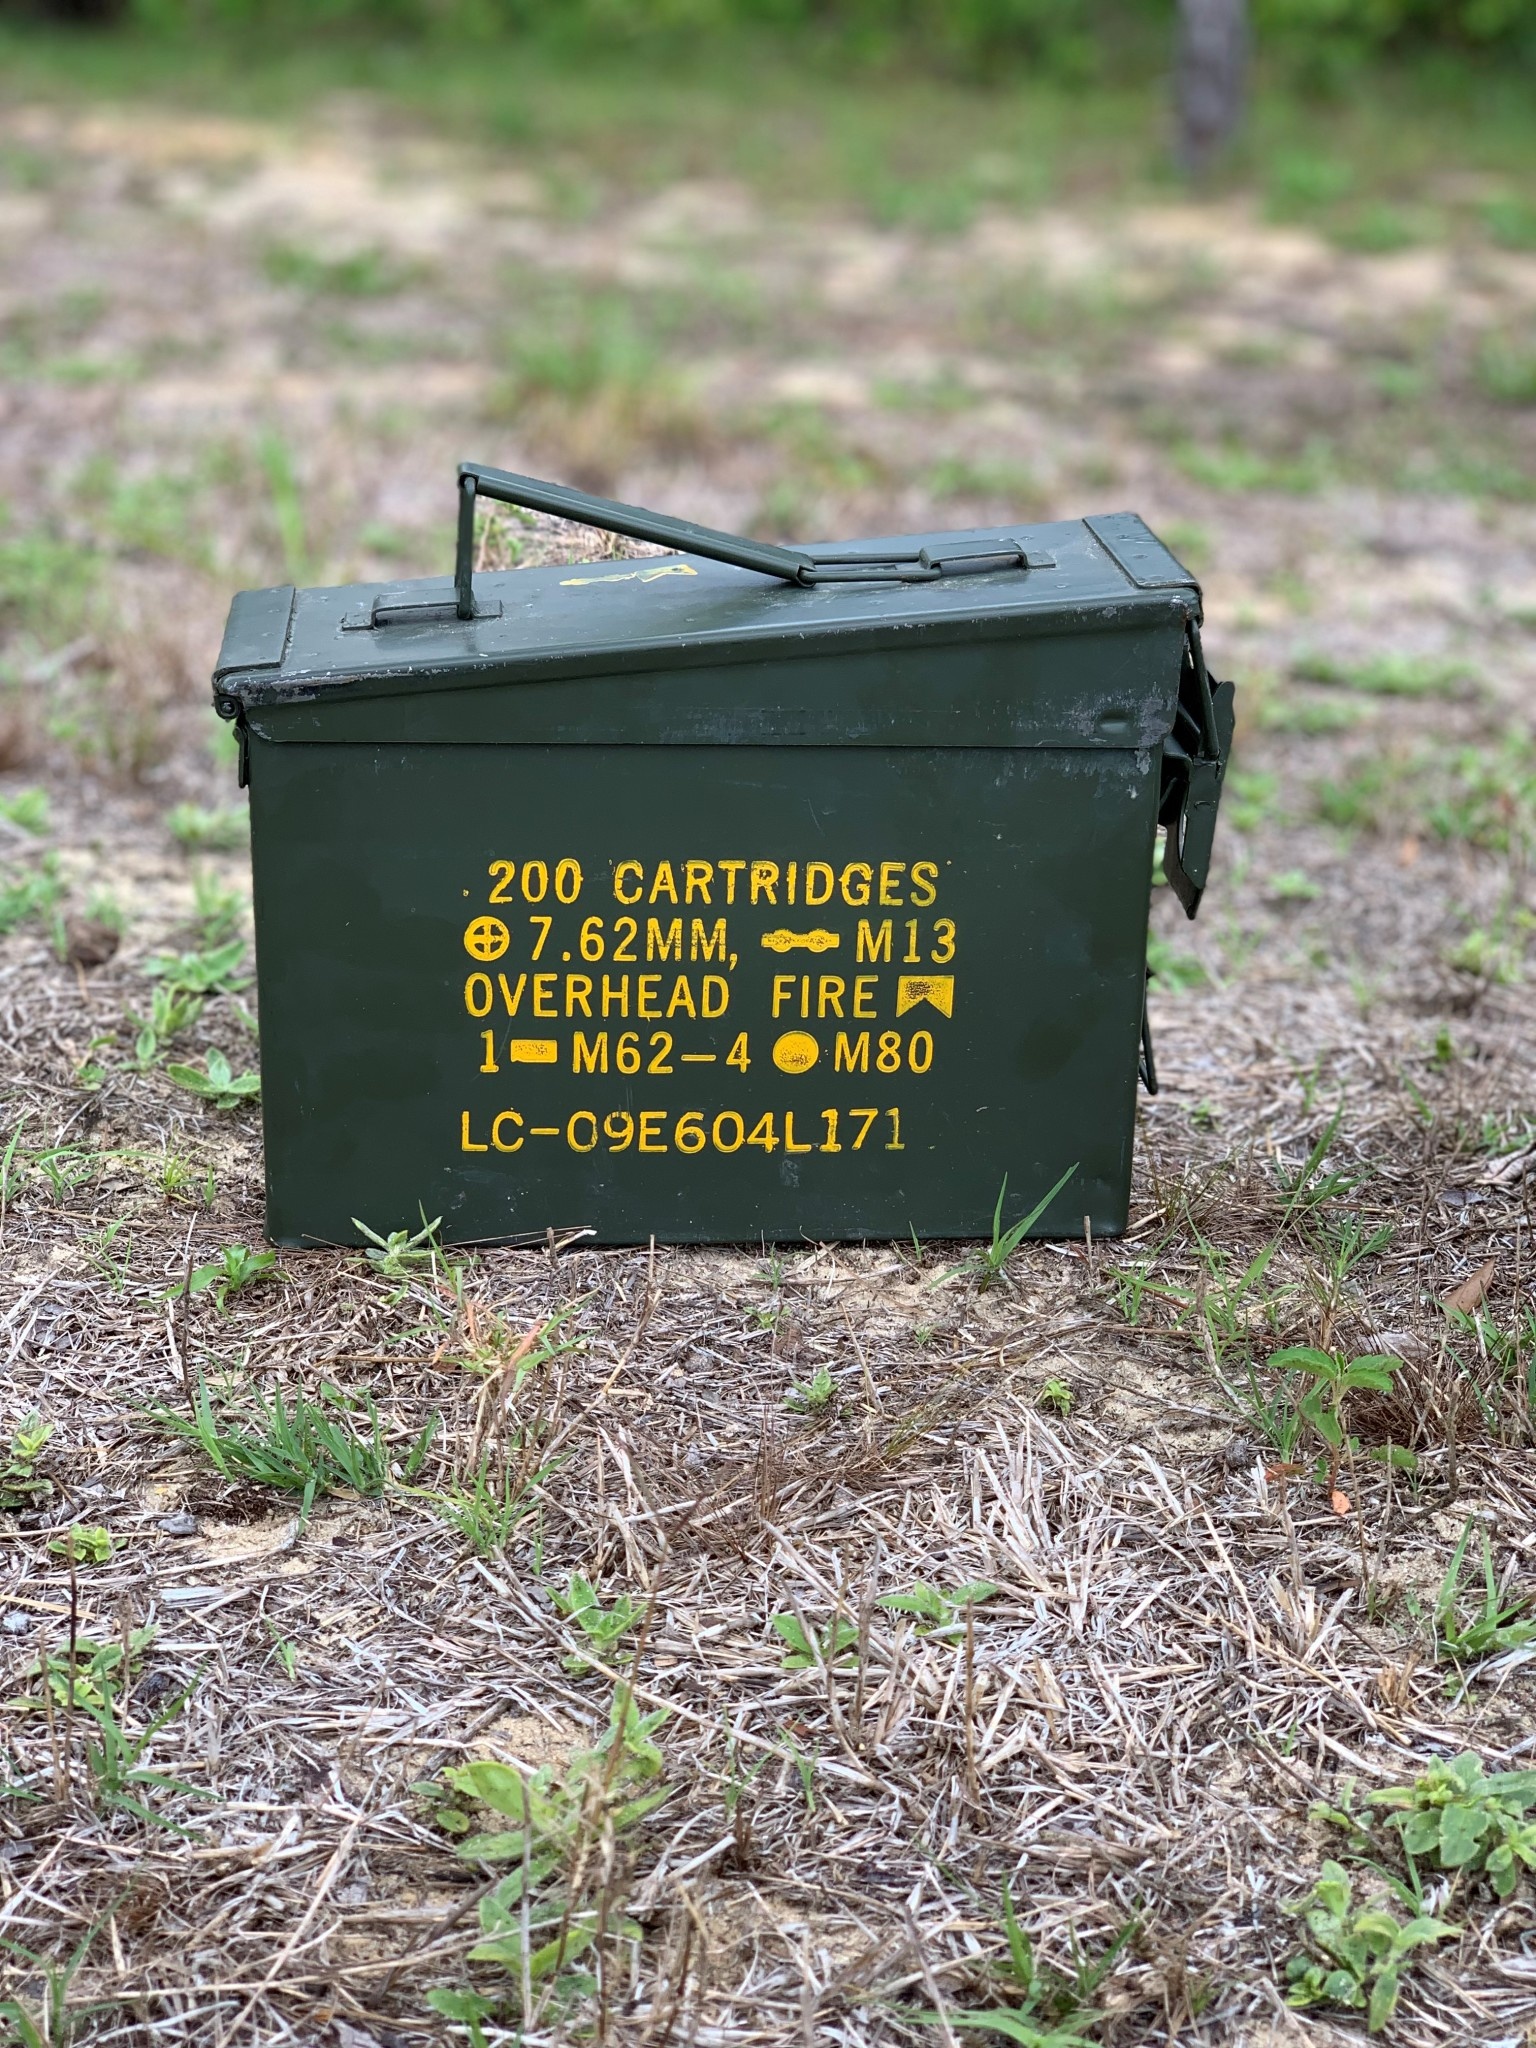 Military .30 Caliber Ammo Cans